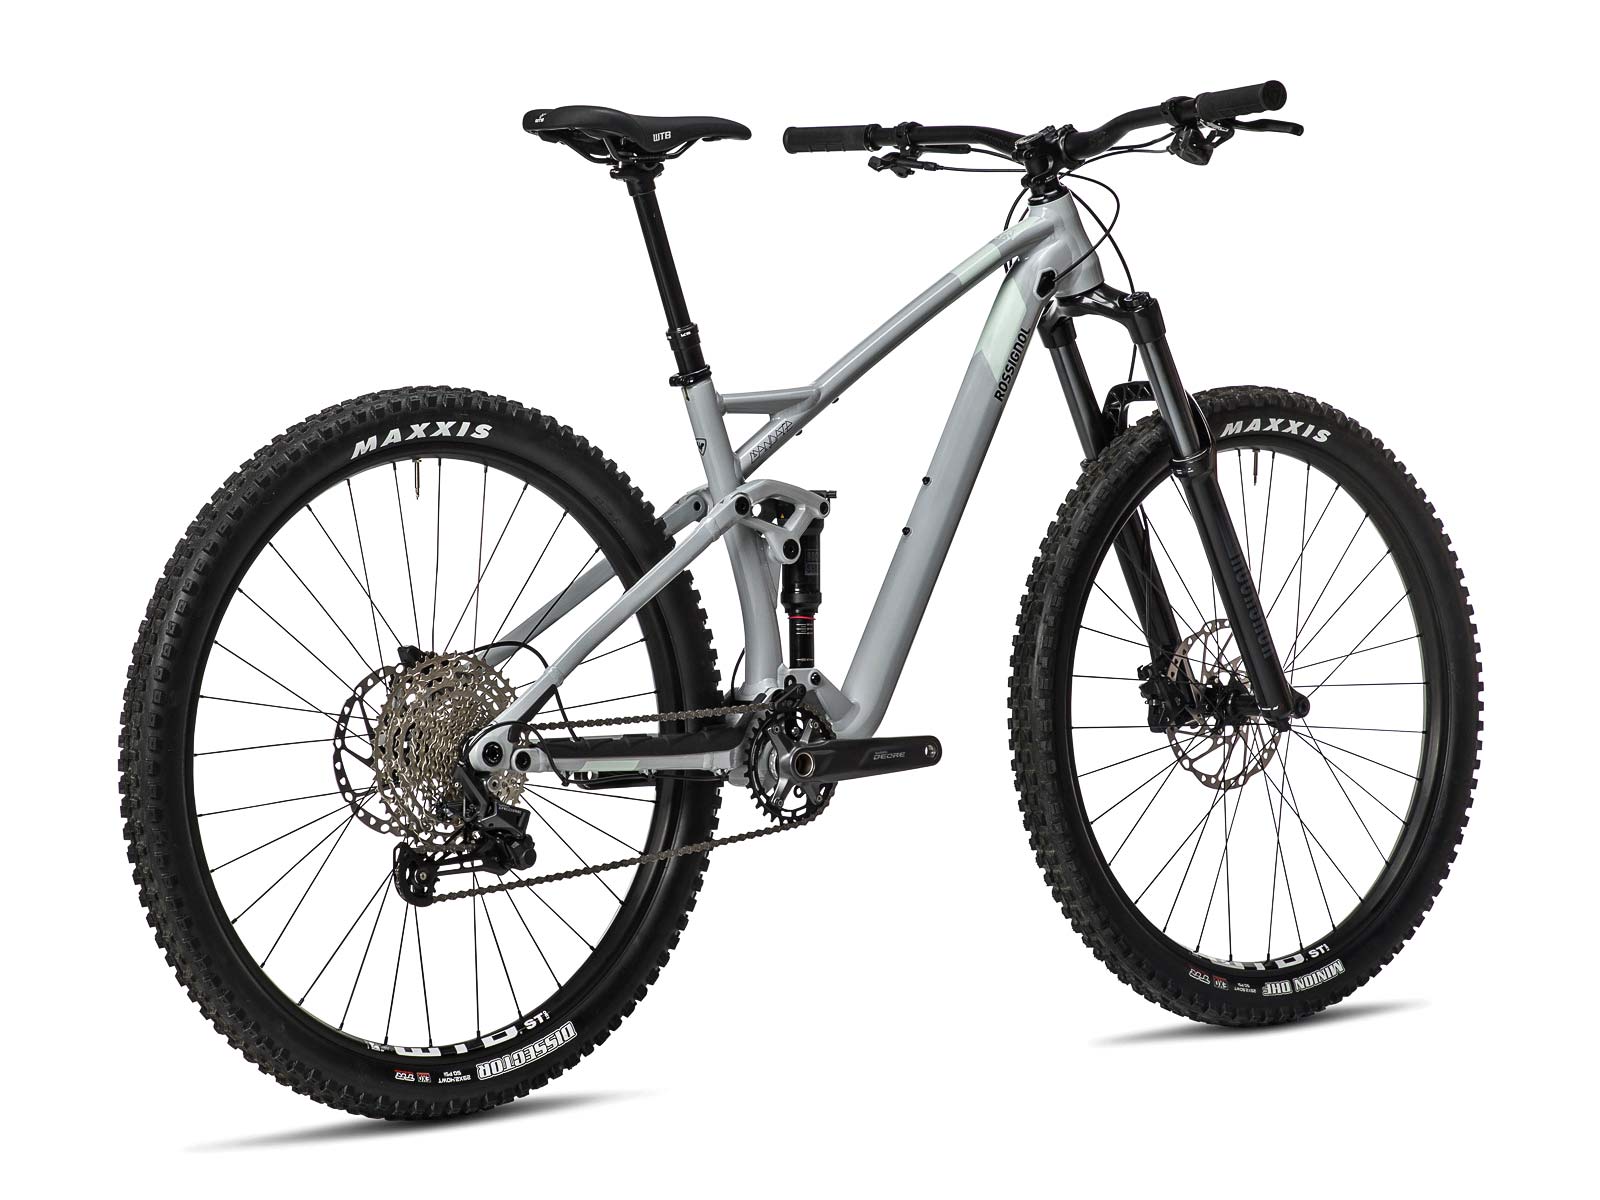 Affordable 2022 Rossignol alloy mountain bikes, Mandate rear